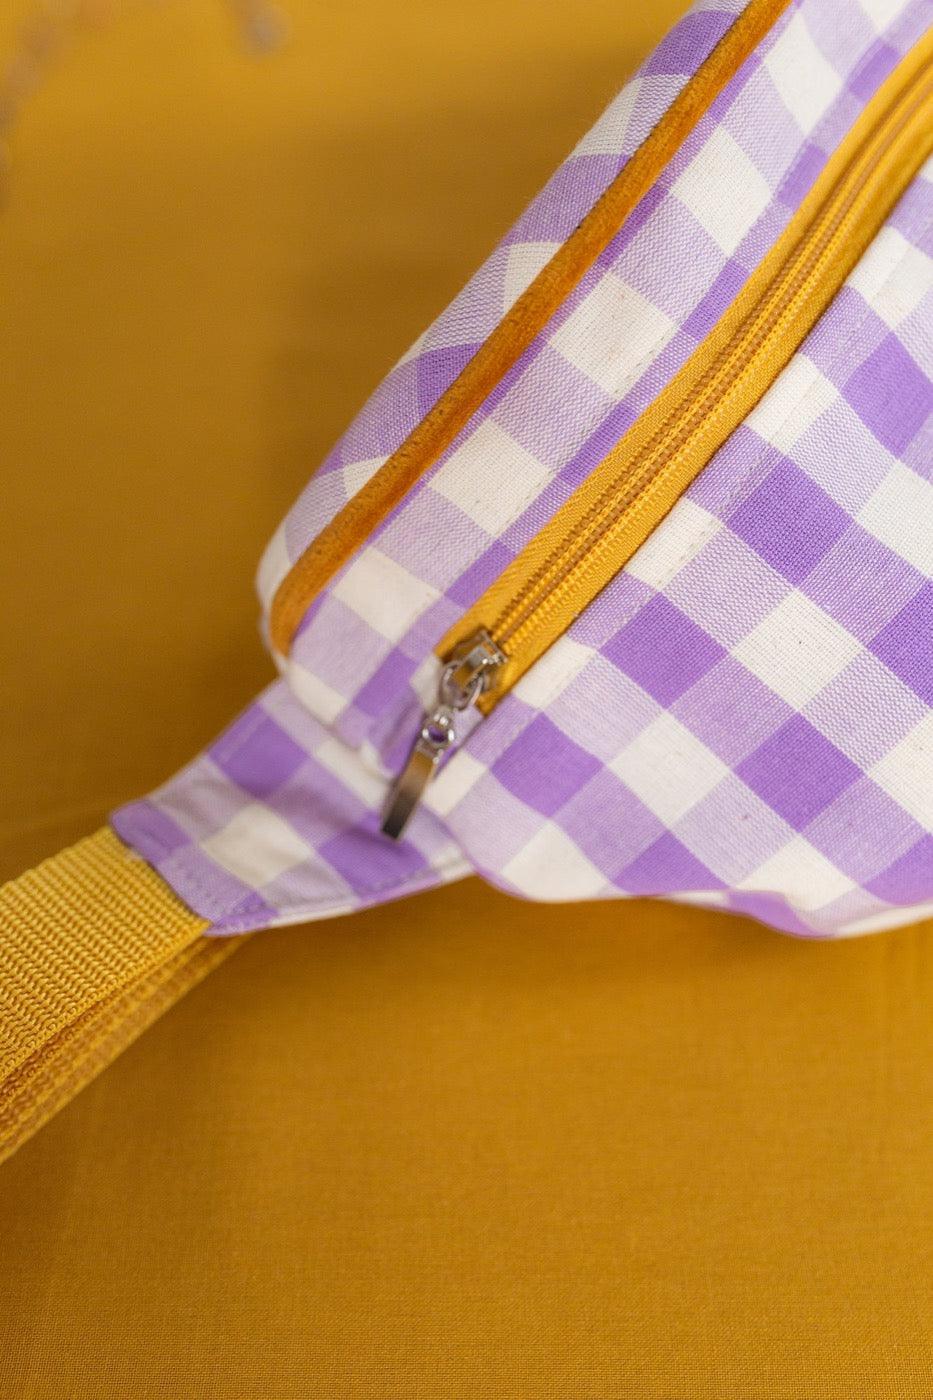 Hip Pack City | Fanny Pack | Gingham | Lilac - www.bettyshome.com